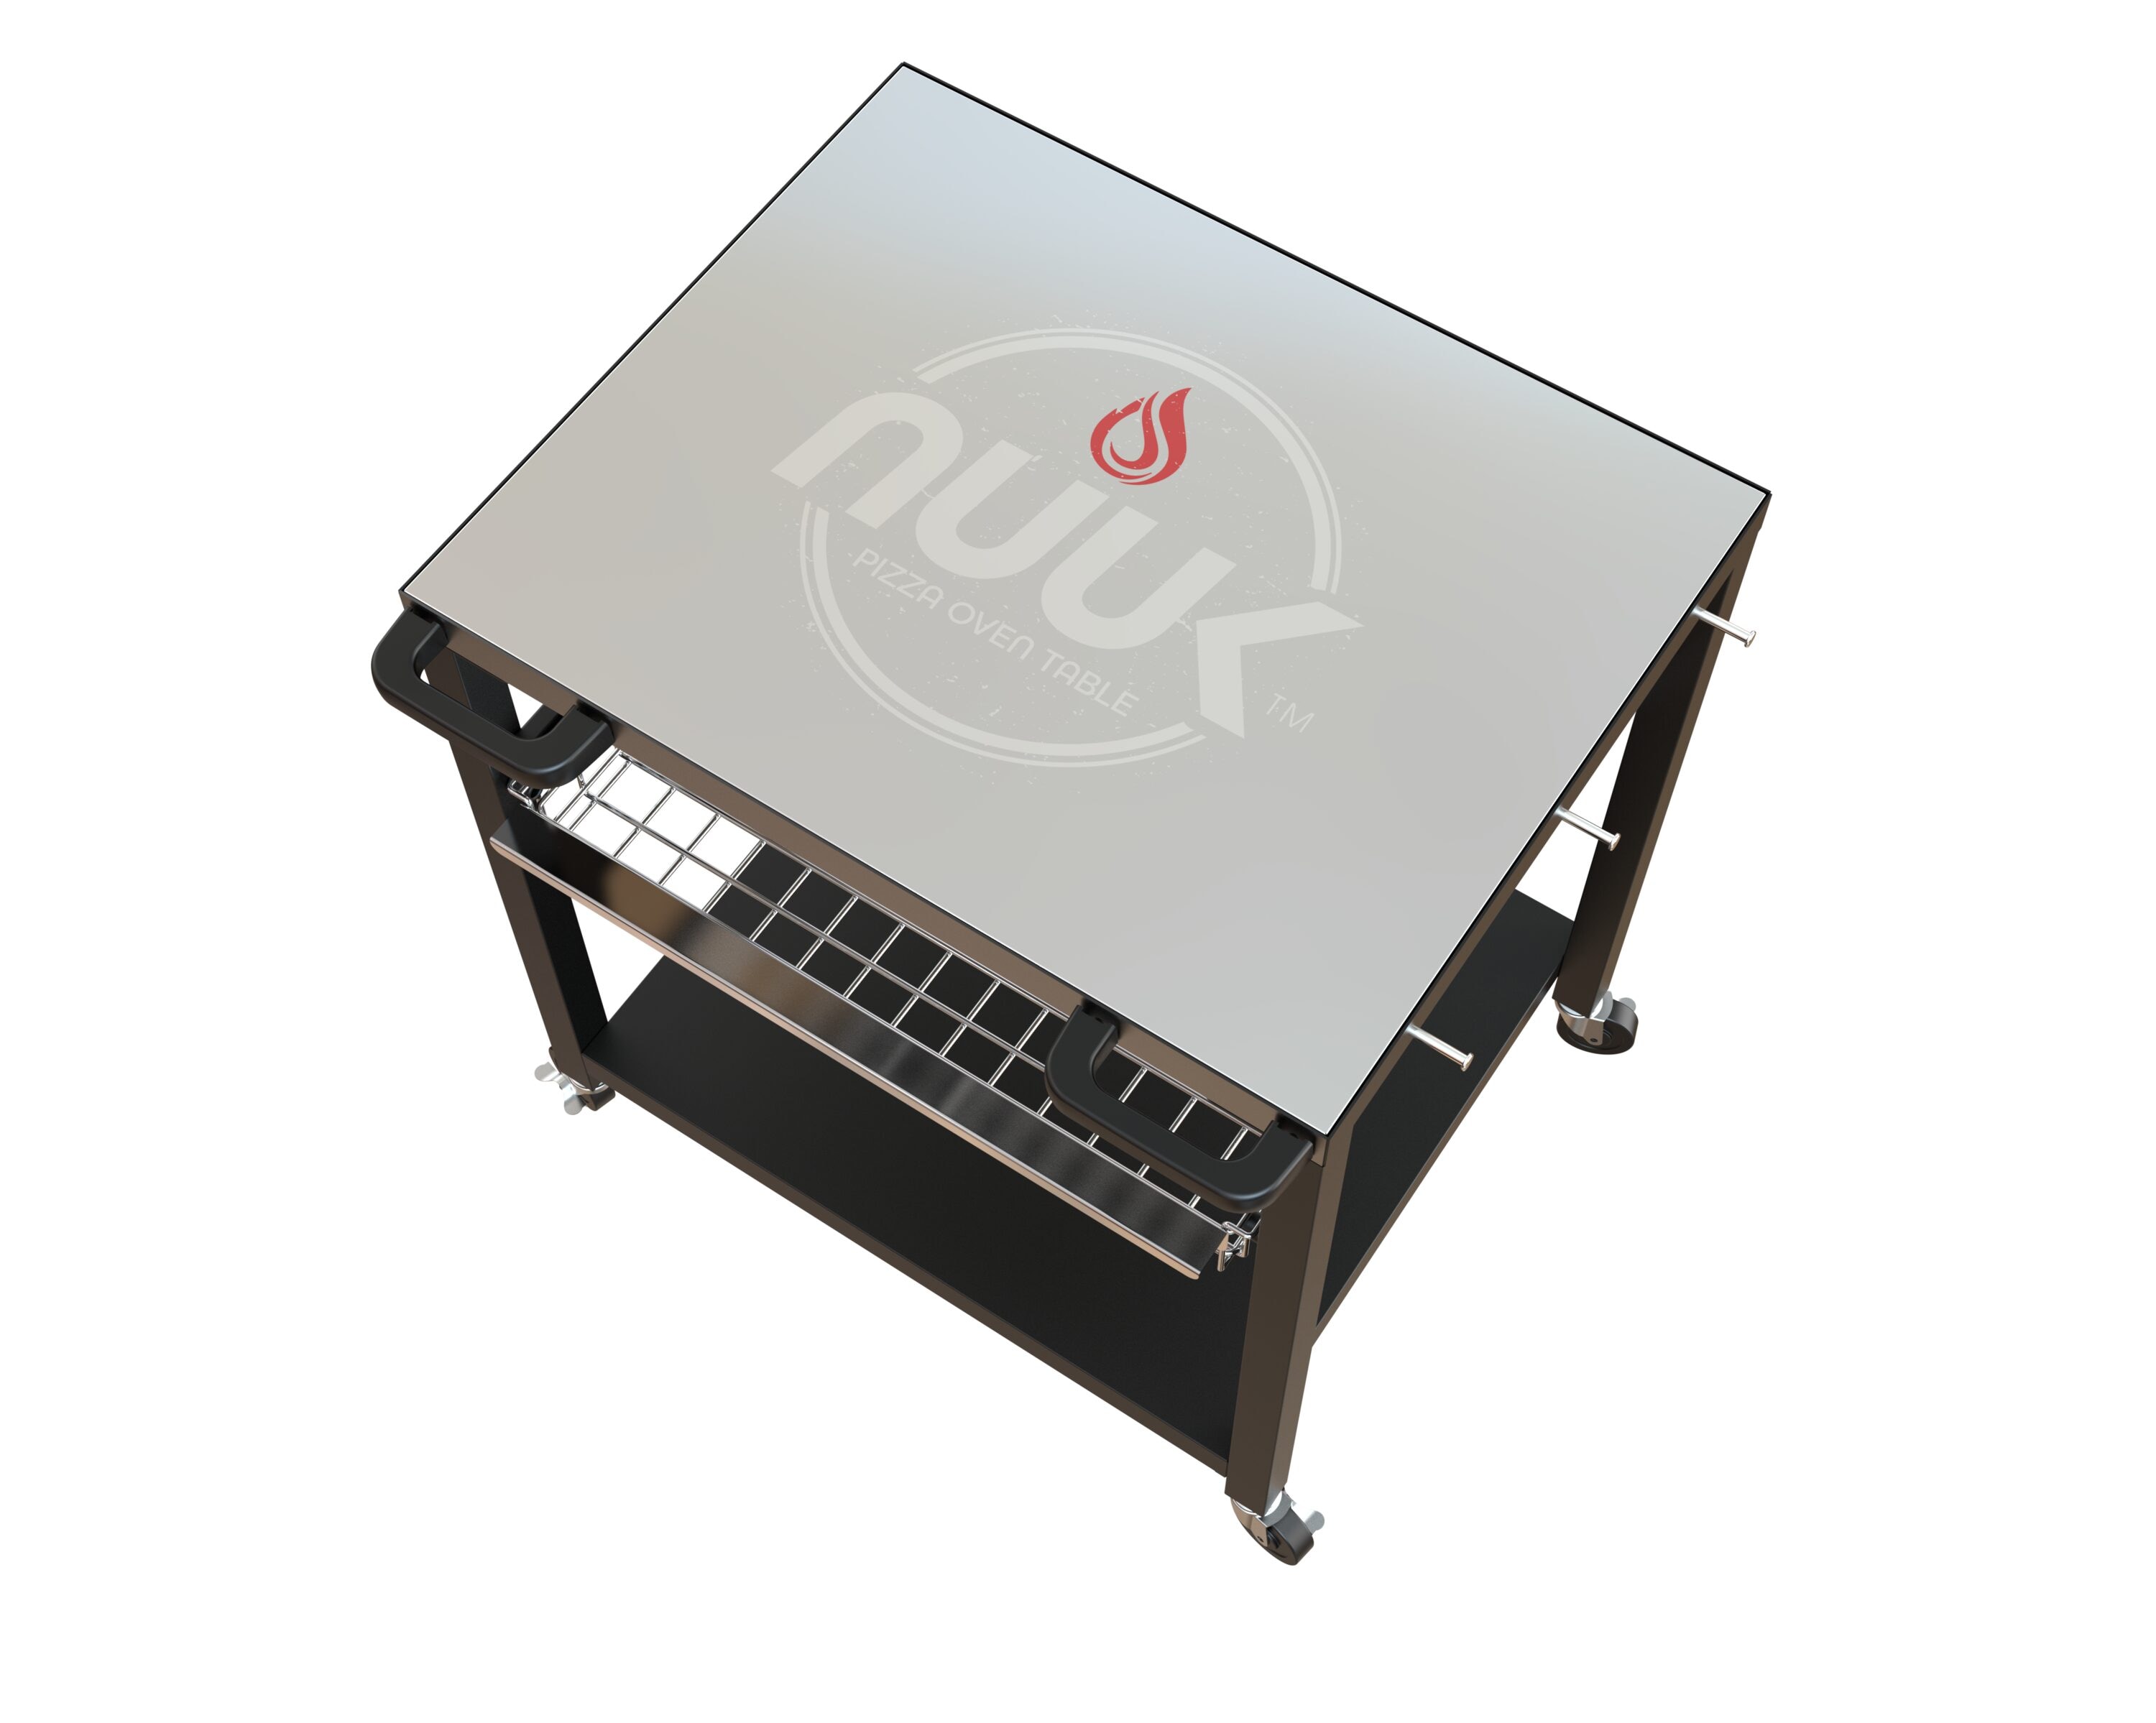 NUUK USA NUUK Grilling Tables at & Cart Stands Carts Grill Grill the in department Grill Steel